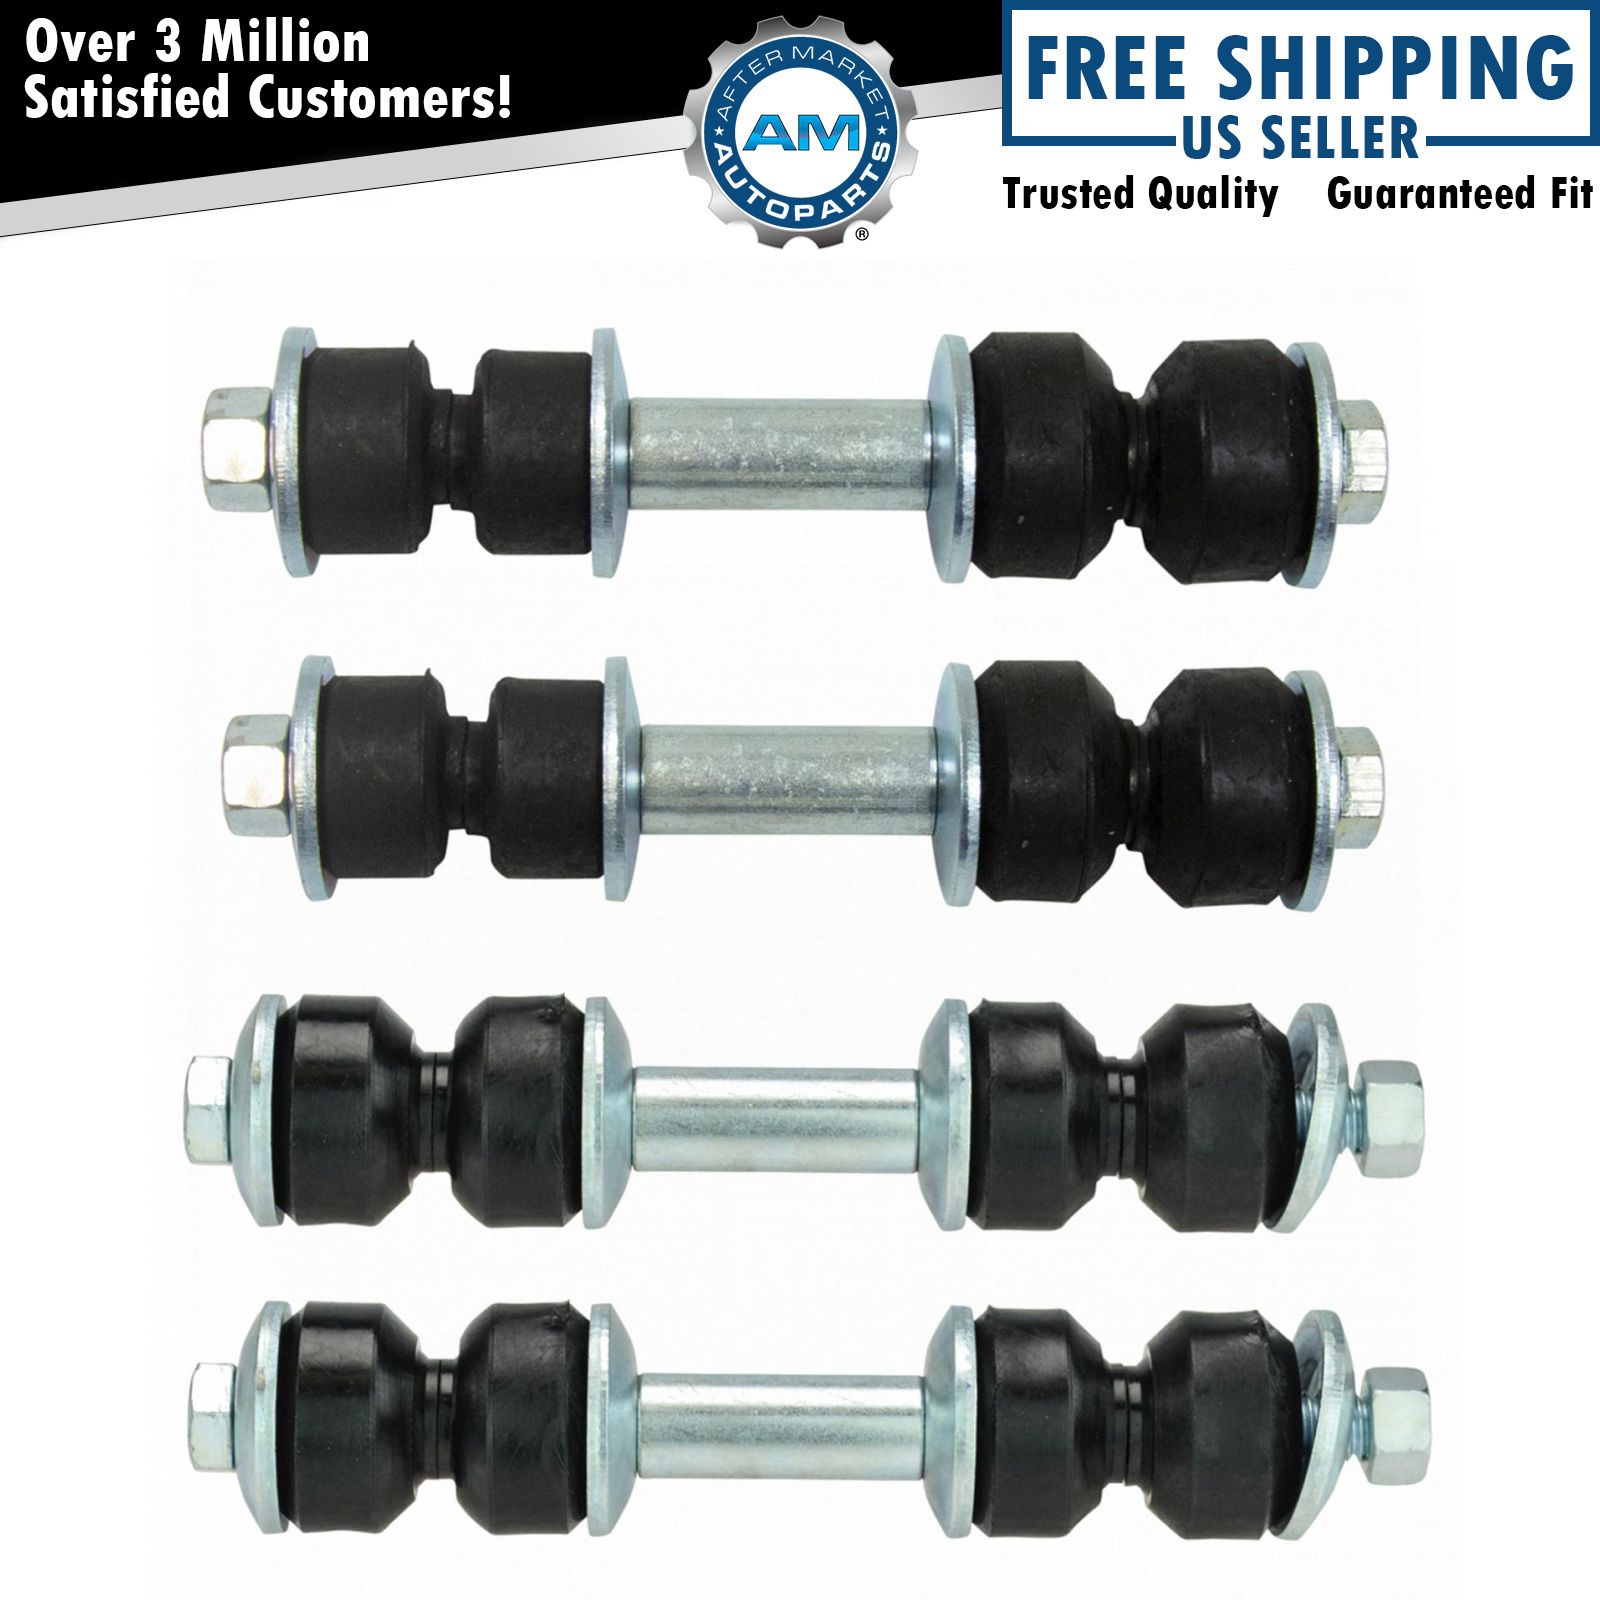 4 Piece Front & Rear Stabilizer Sway Bar End Link Kit Set for Buick Cadillac